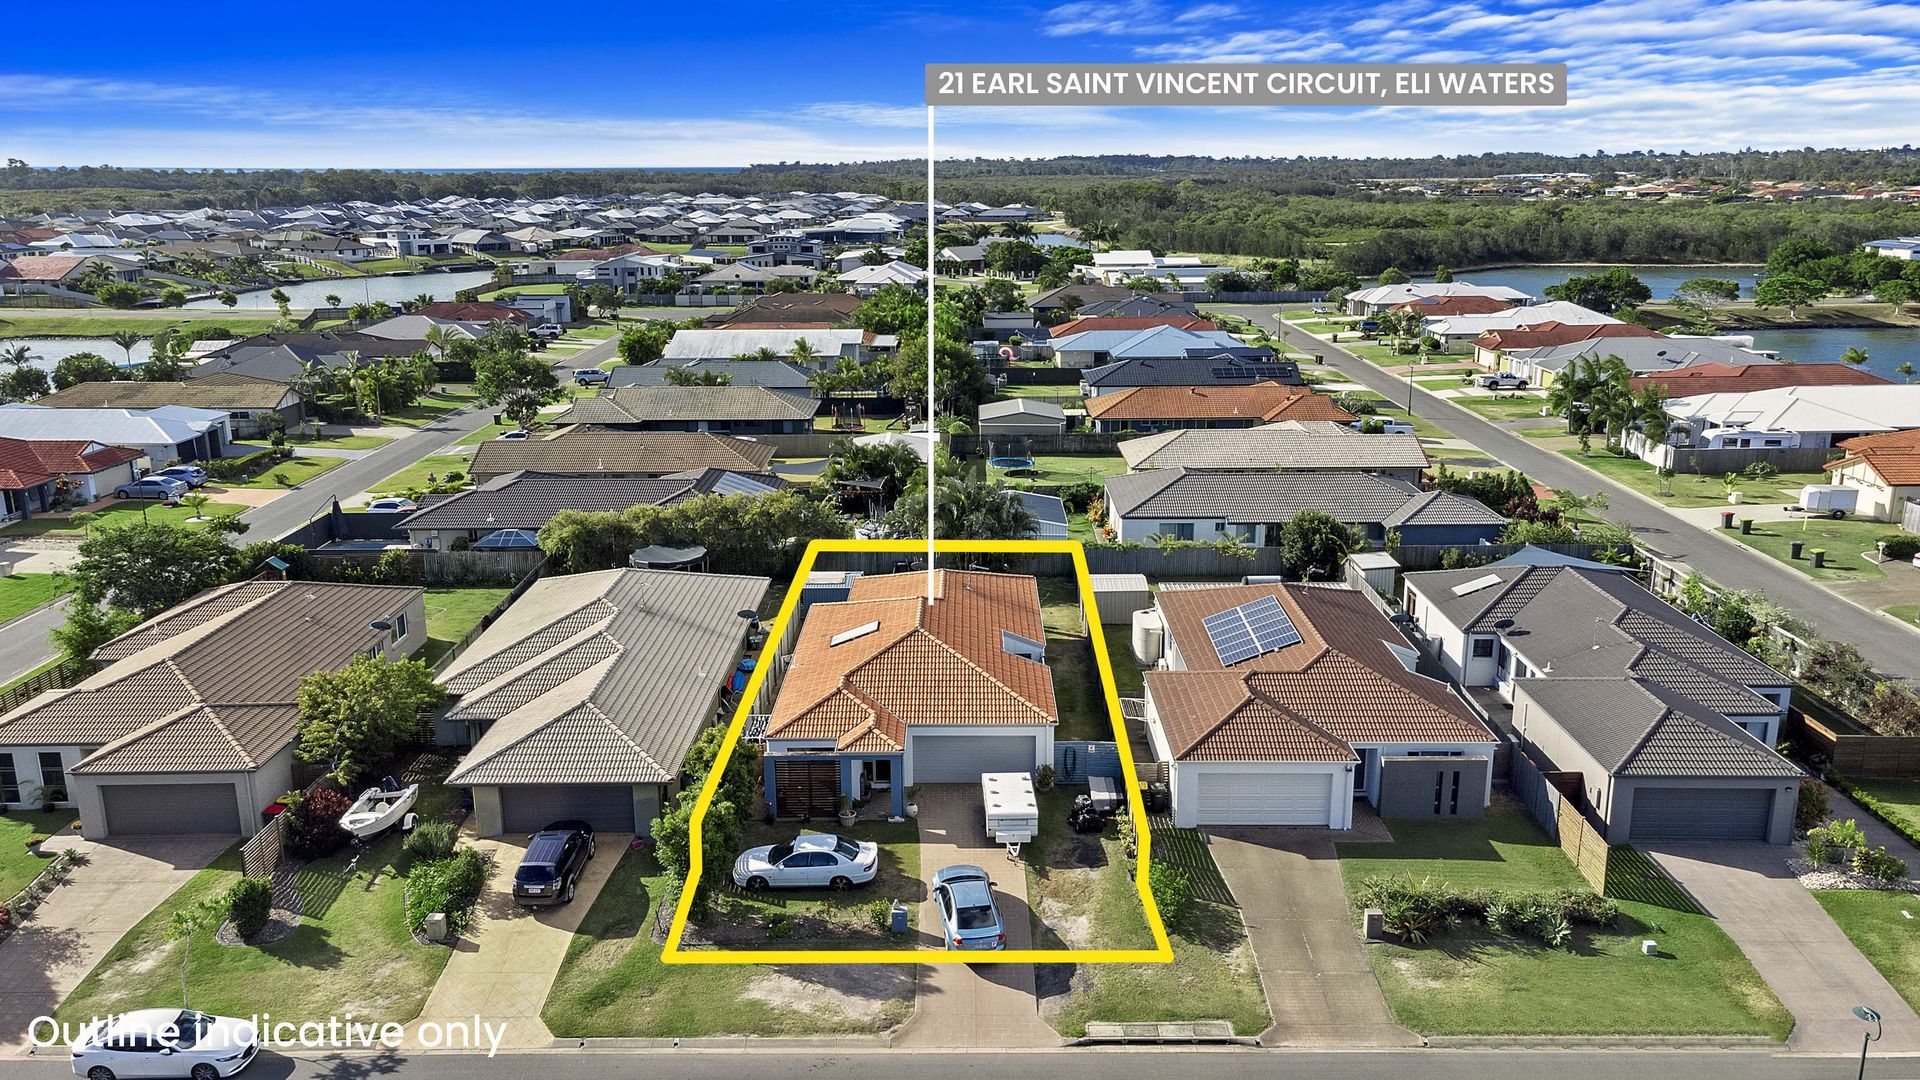 21 Earl St Vincent Circuit, Eli Waters QLD 4655, Image 1